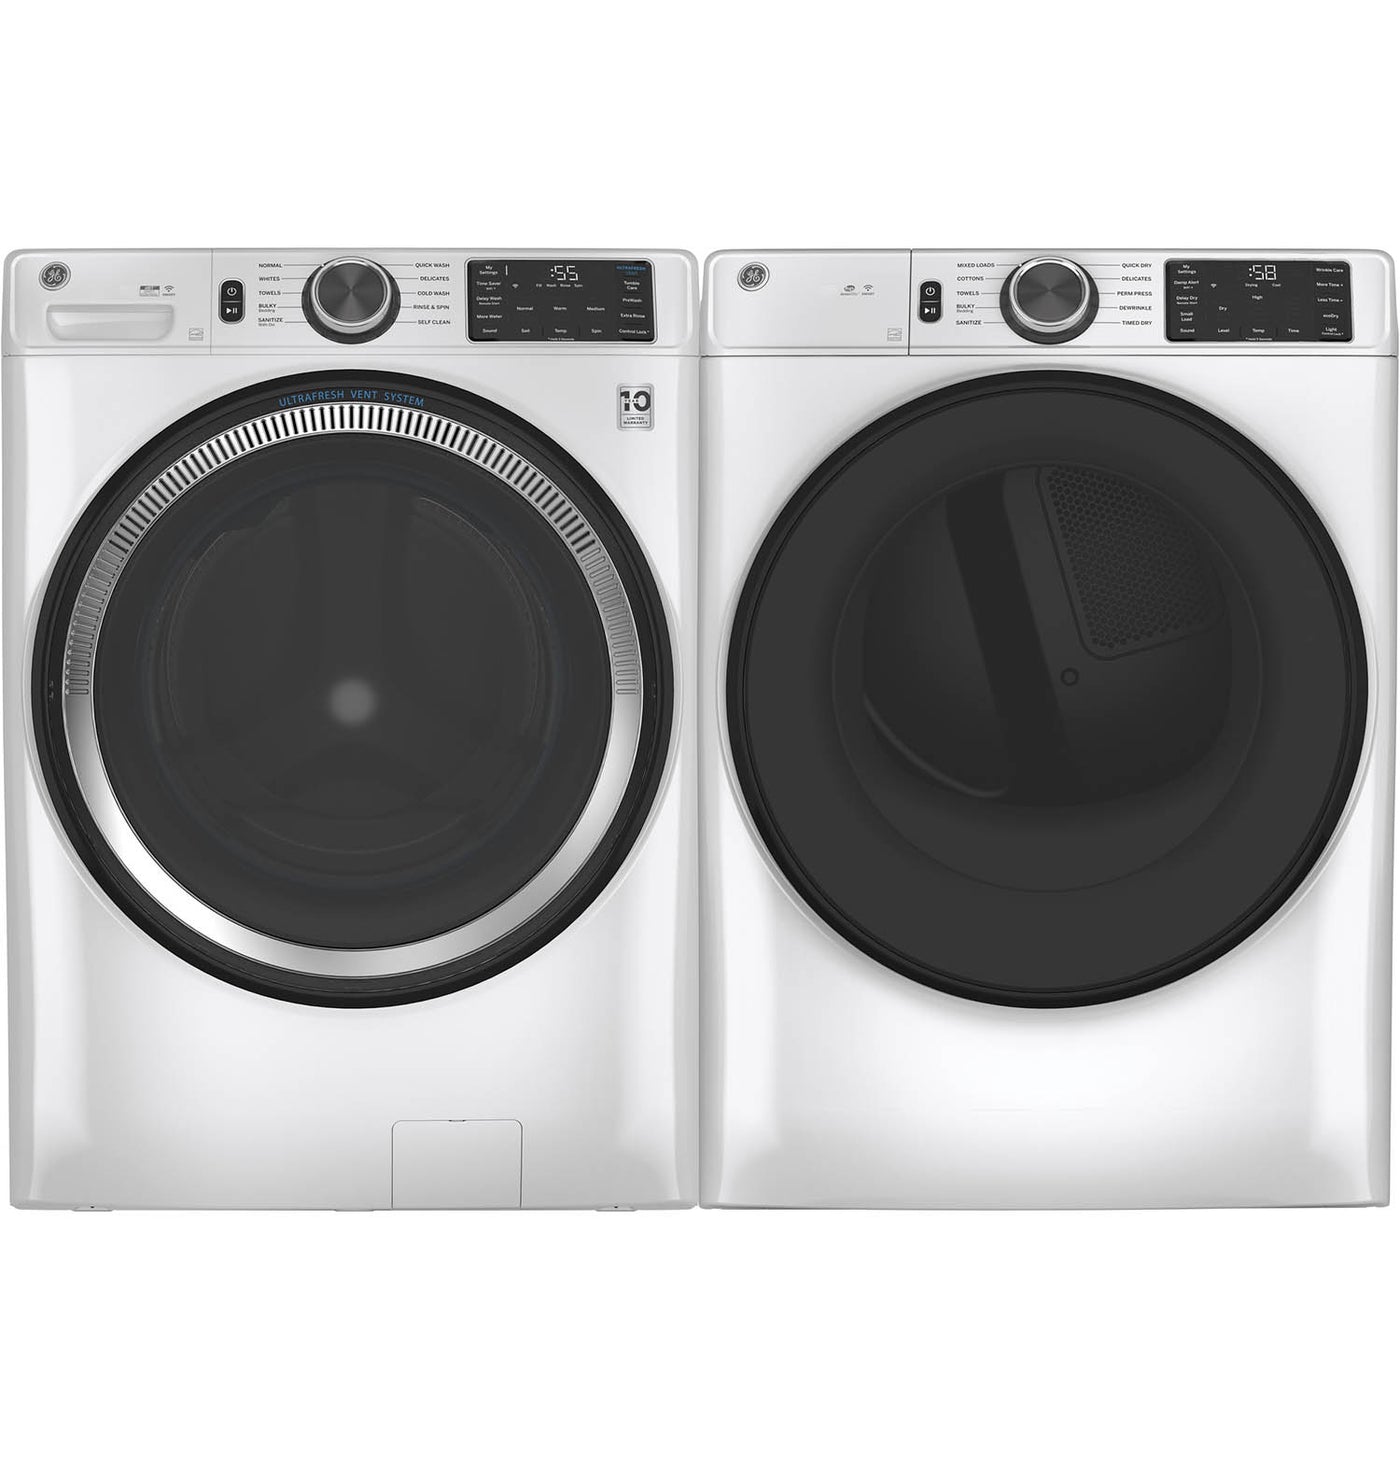 GE White Front Load Washer (5.5 Cu. Ft.) & GE White Electric Front Load Dryer ( 7.8 Cu. Ft.) - GFW550SMNWW/GFD55ESMNWW